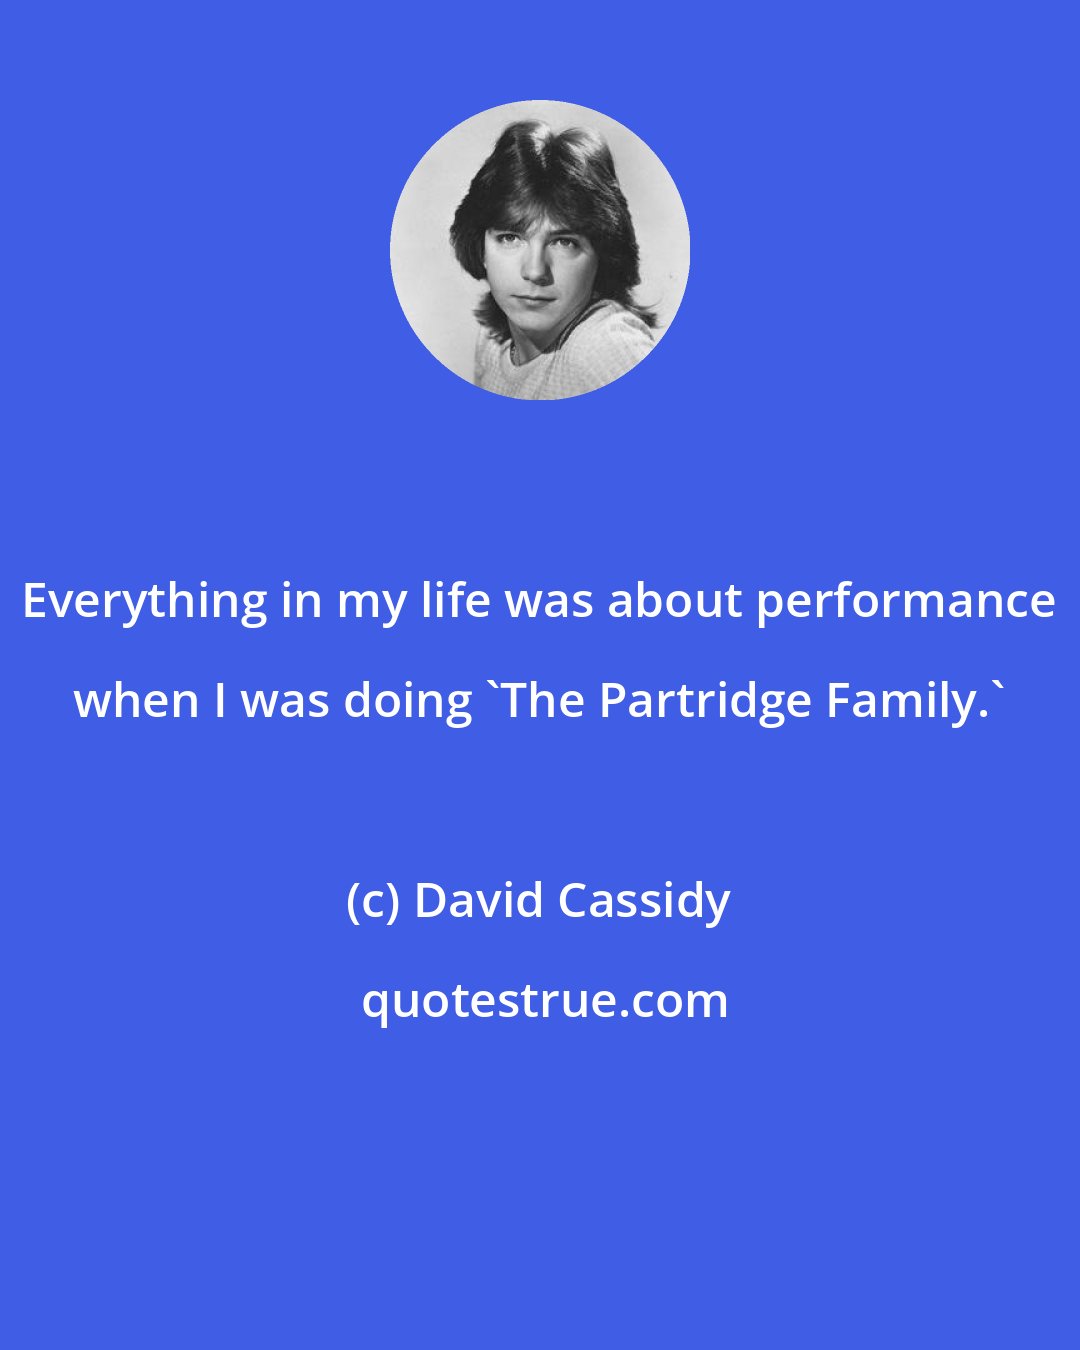 David Cassidy: Everything in my life was about performance when I was doing 'The Partridge Family.'